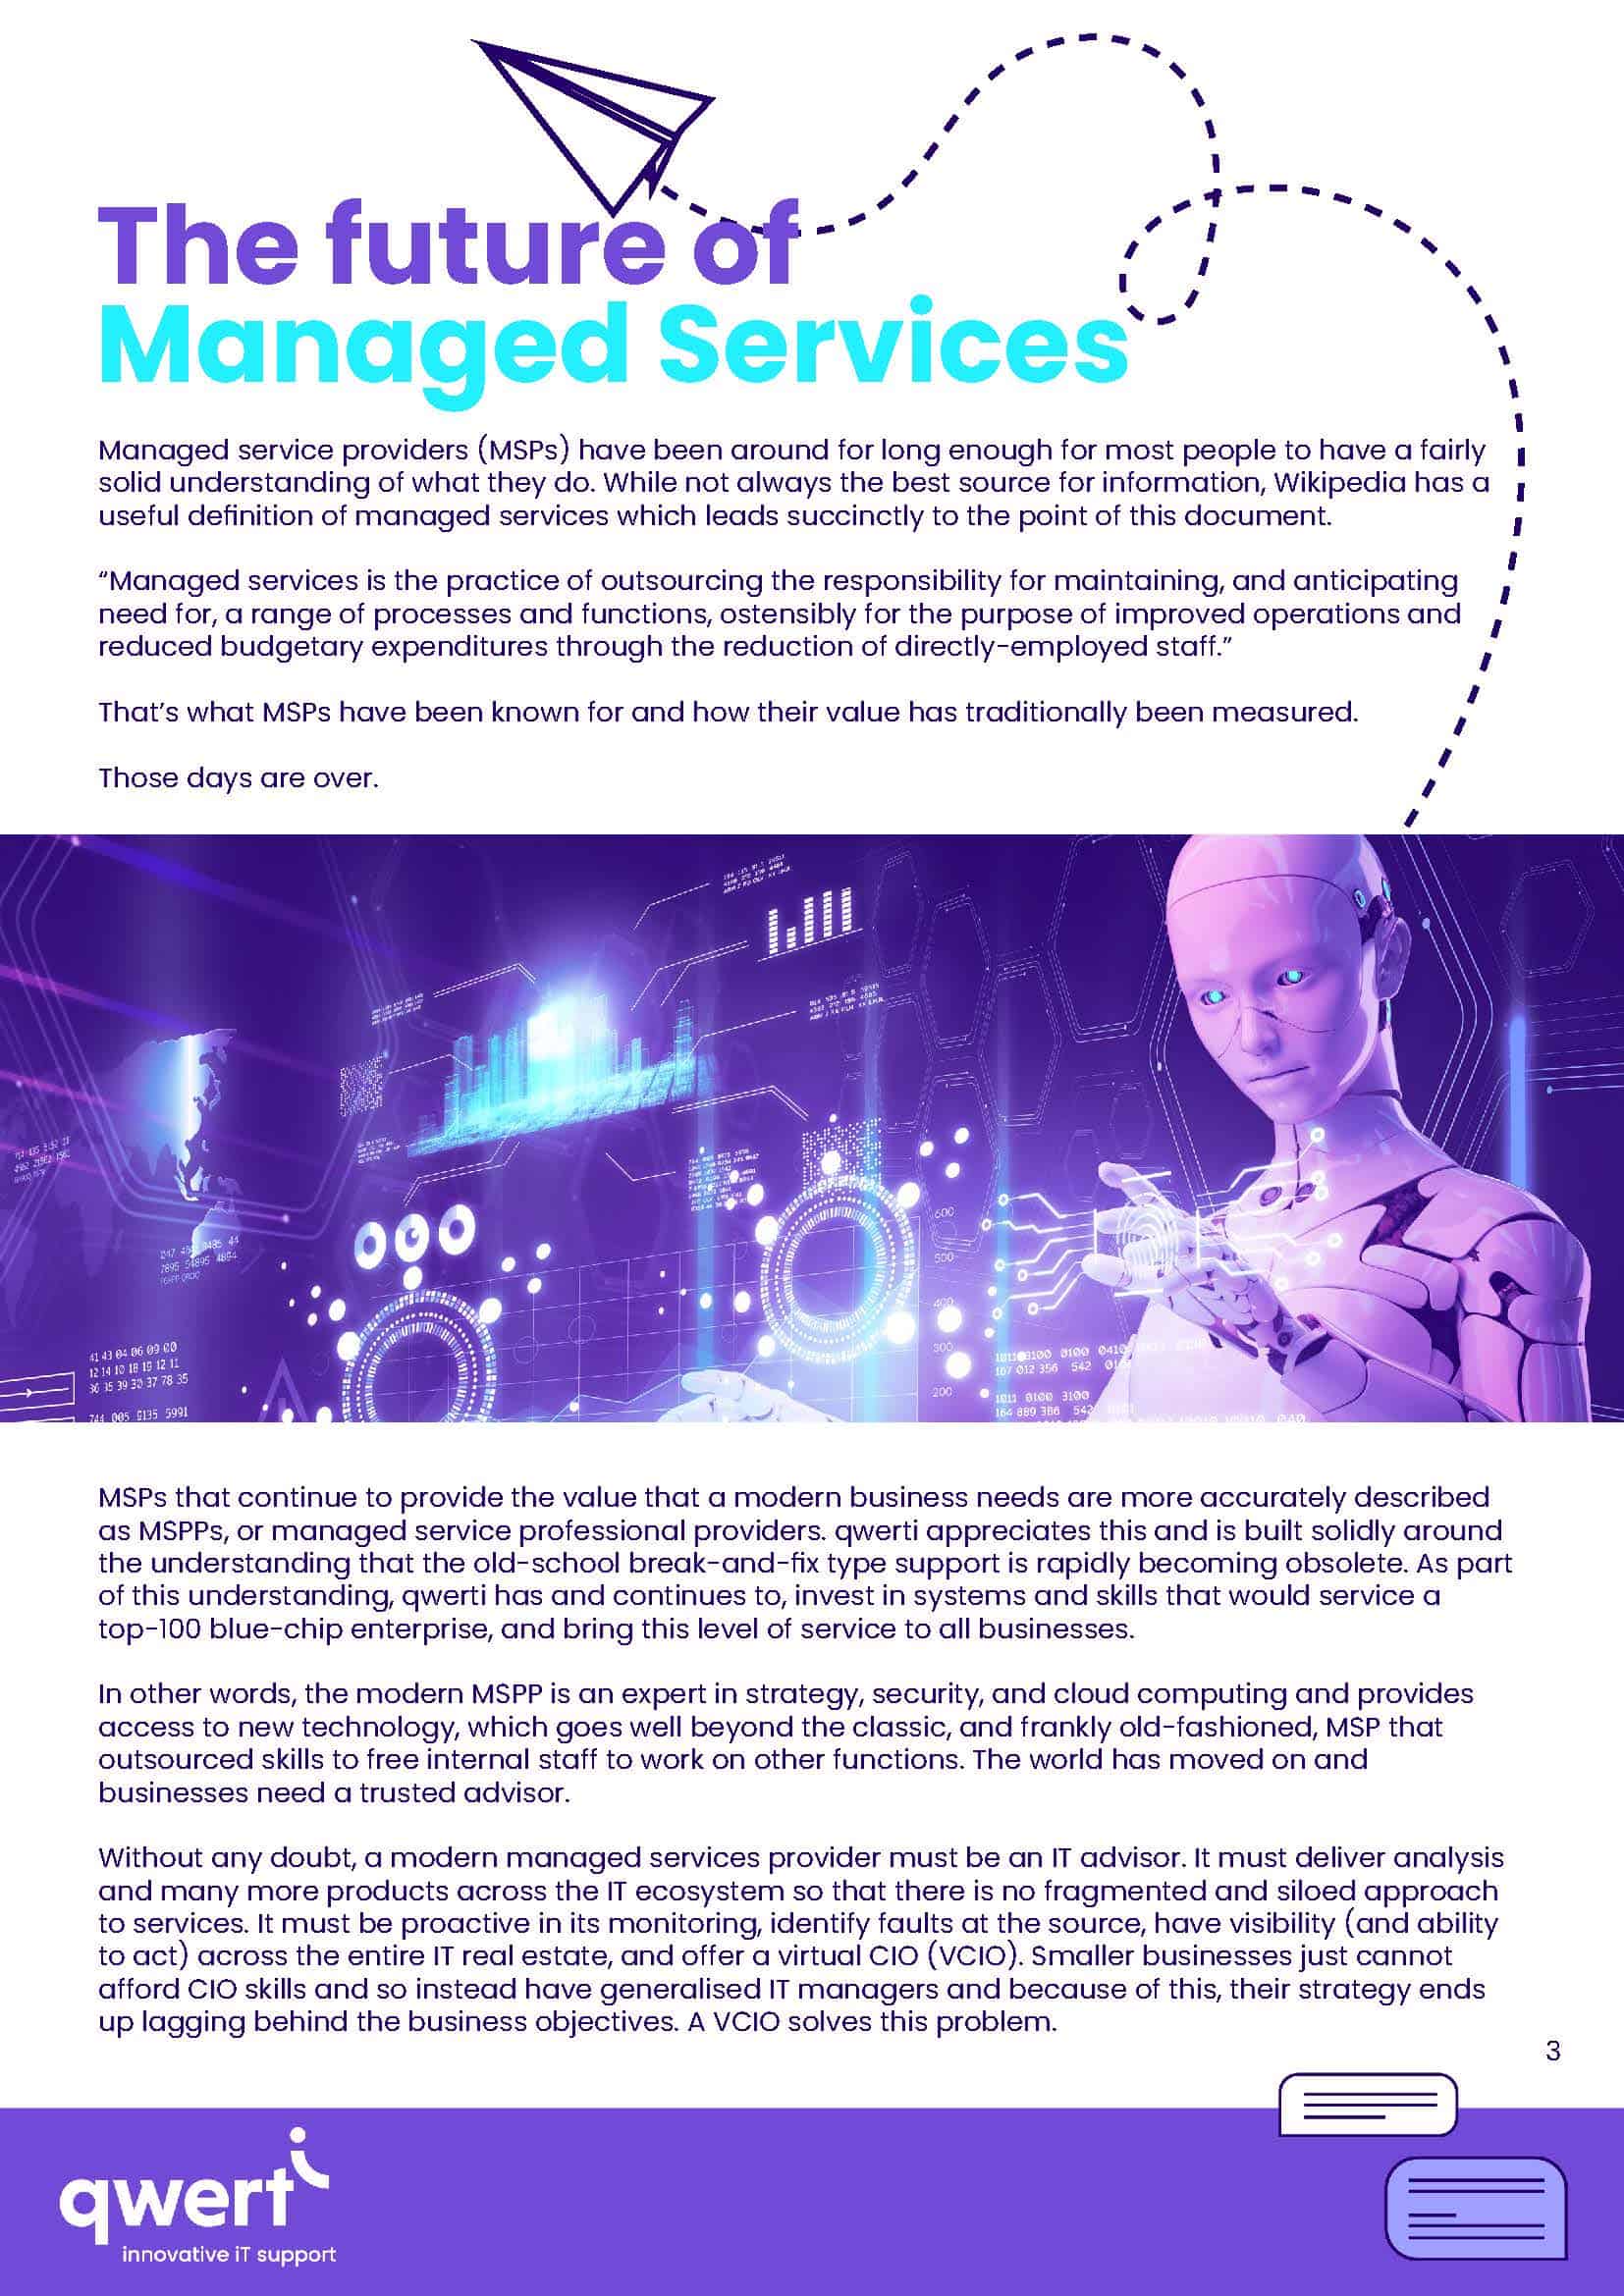 The future of managed services by Qwerti 3